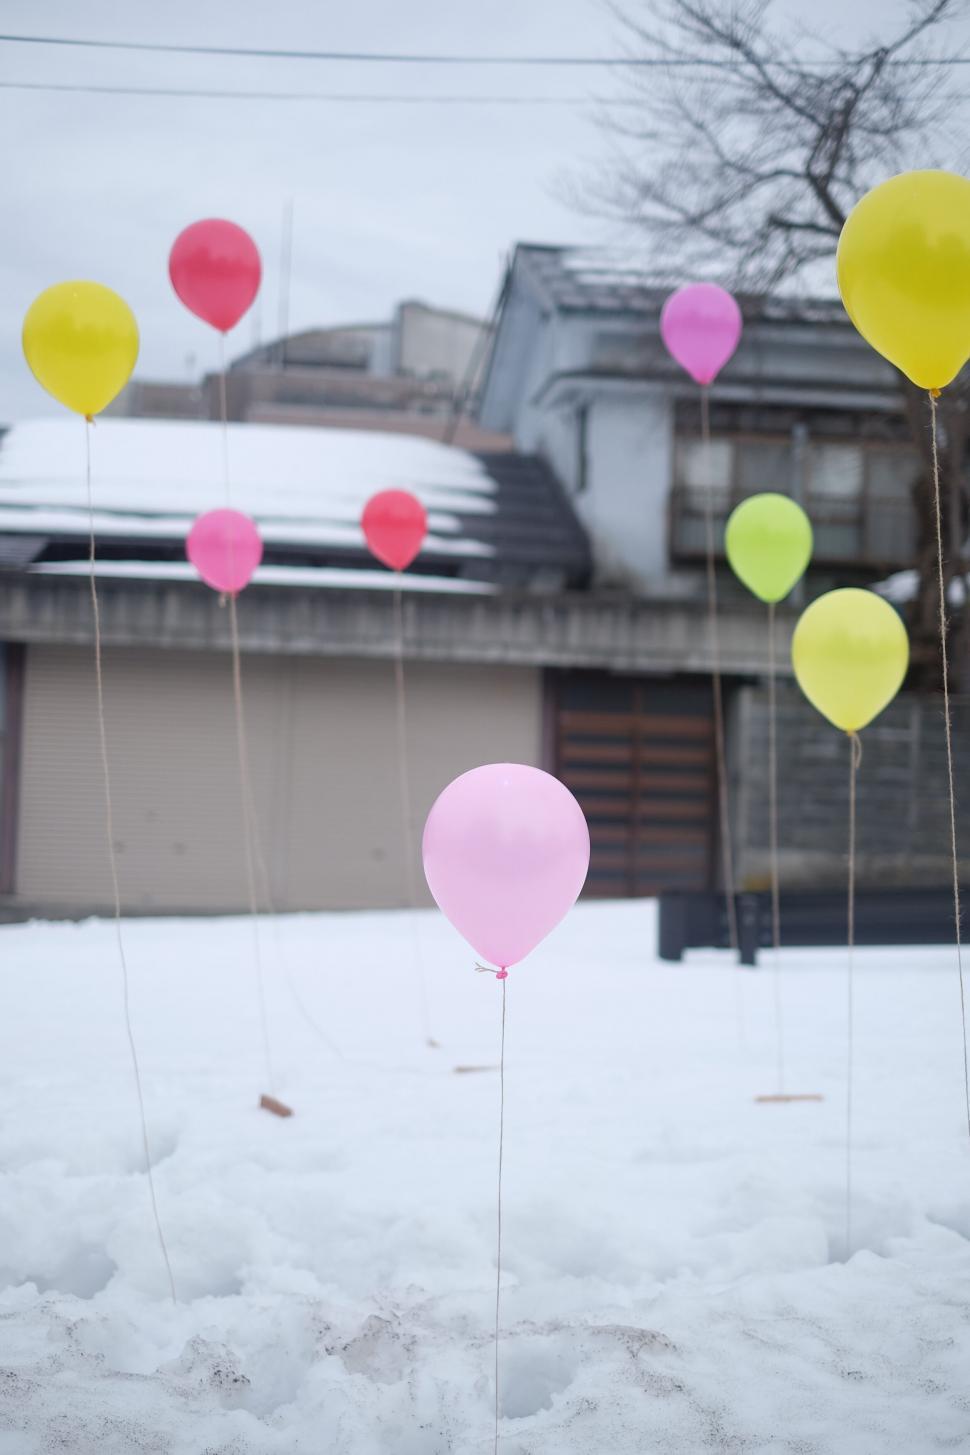 Free Image of Colorful balloons in snowy setting 